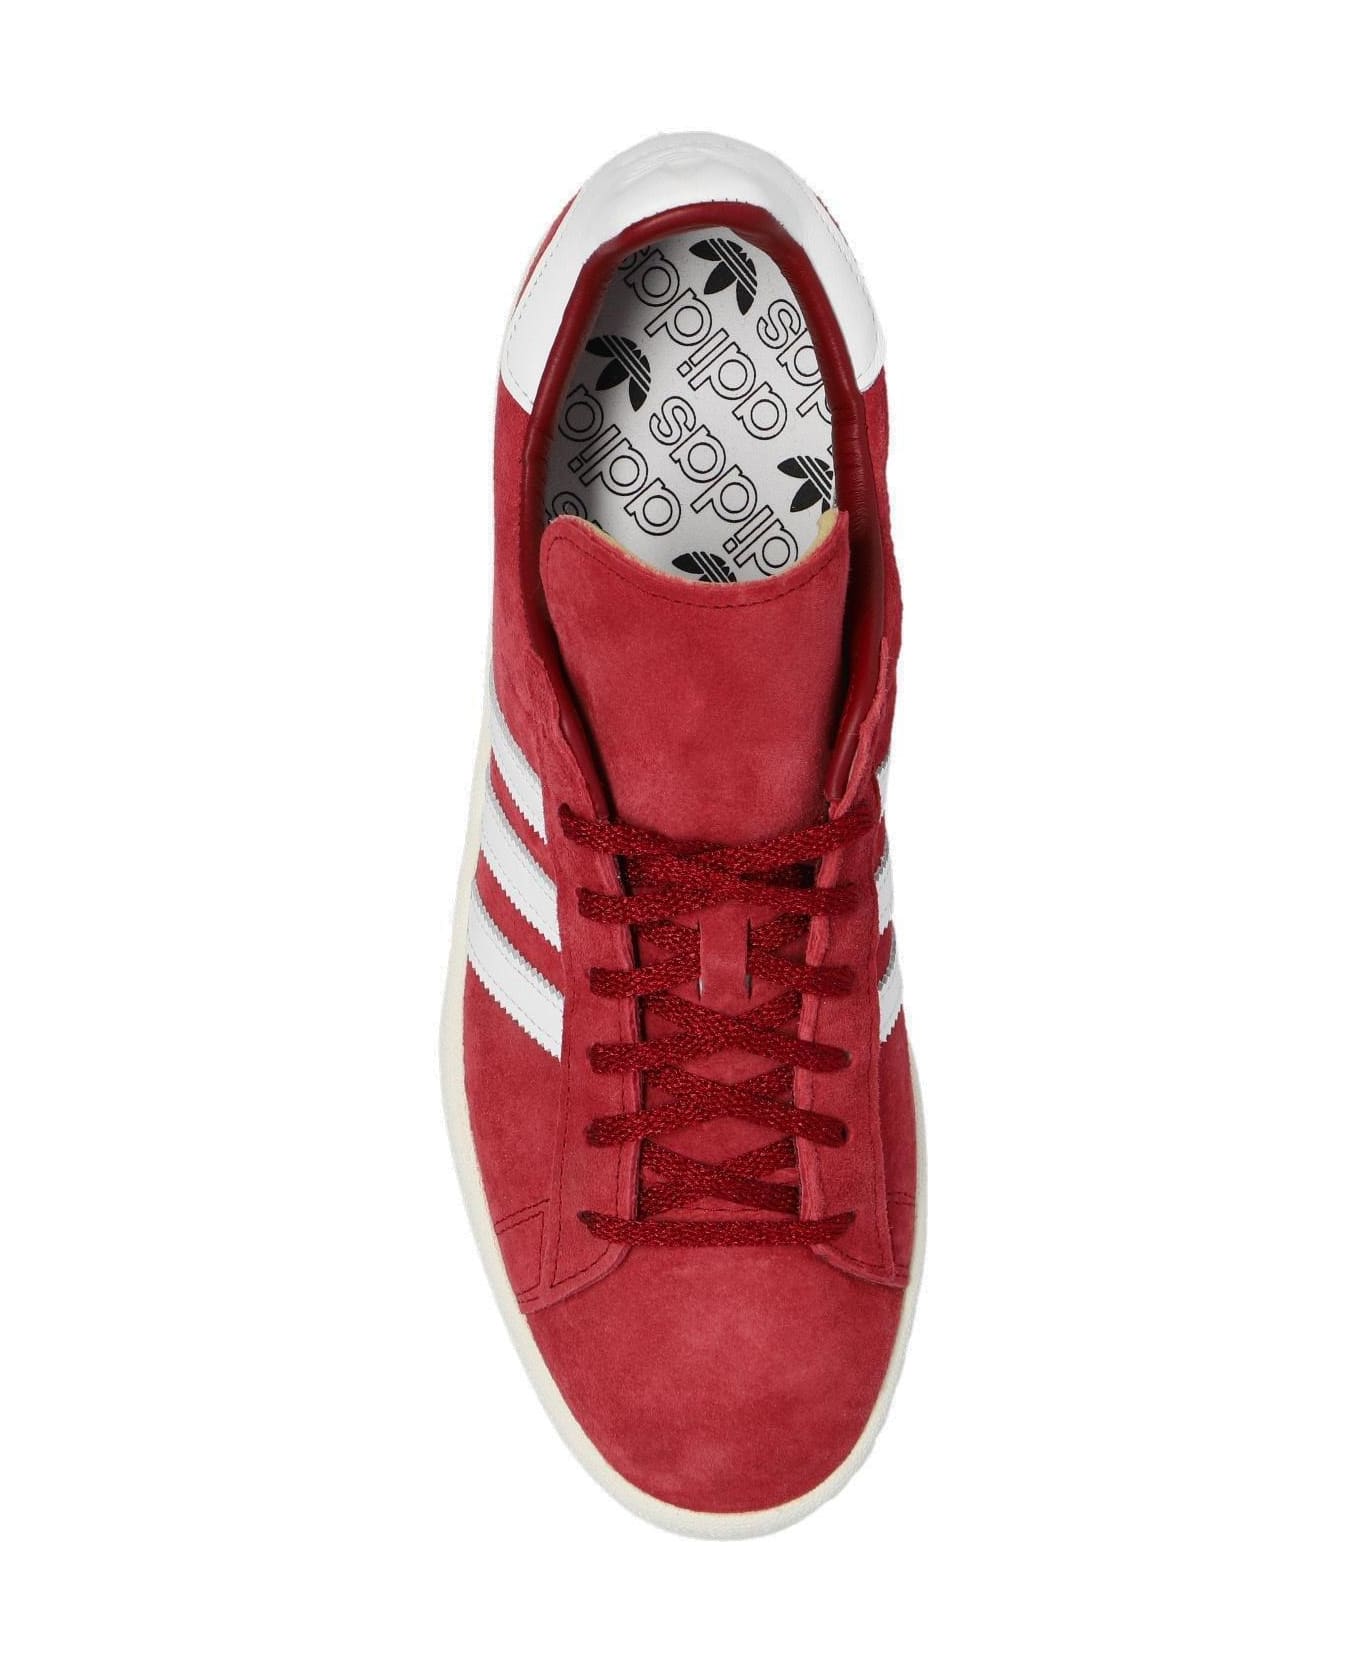 Adidas Campus 80s Lace-up Sneakers - RED スニーカー